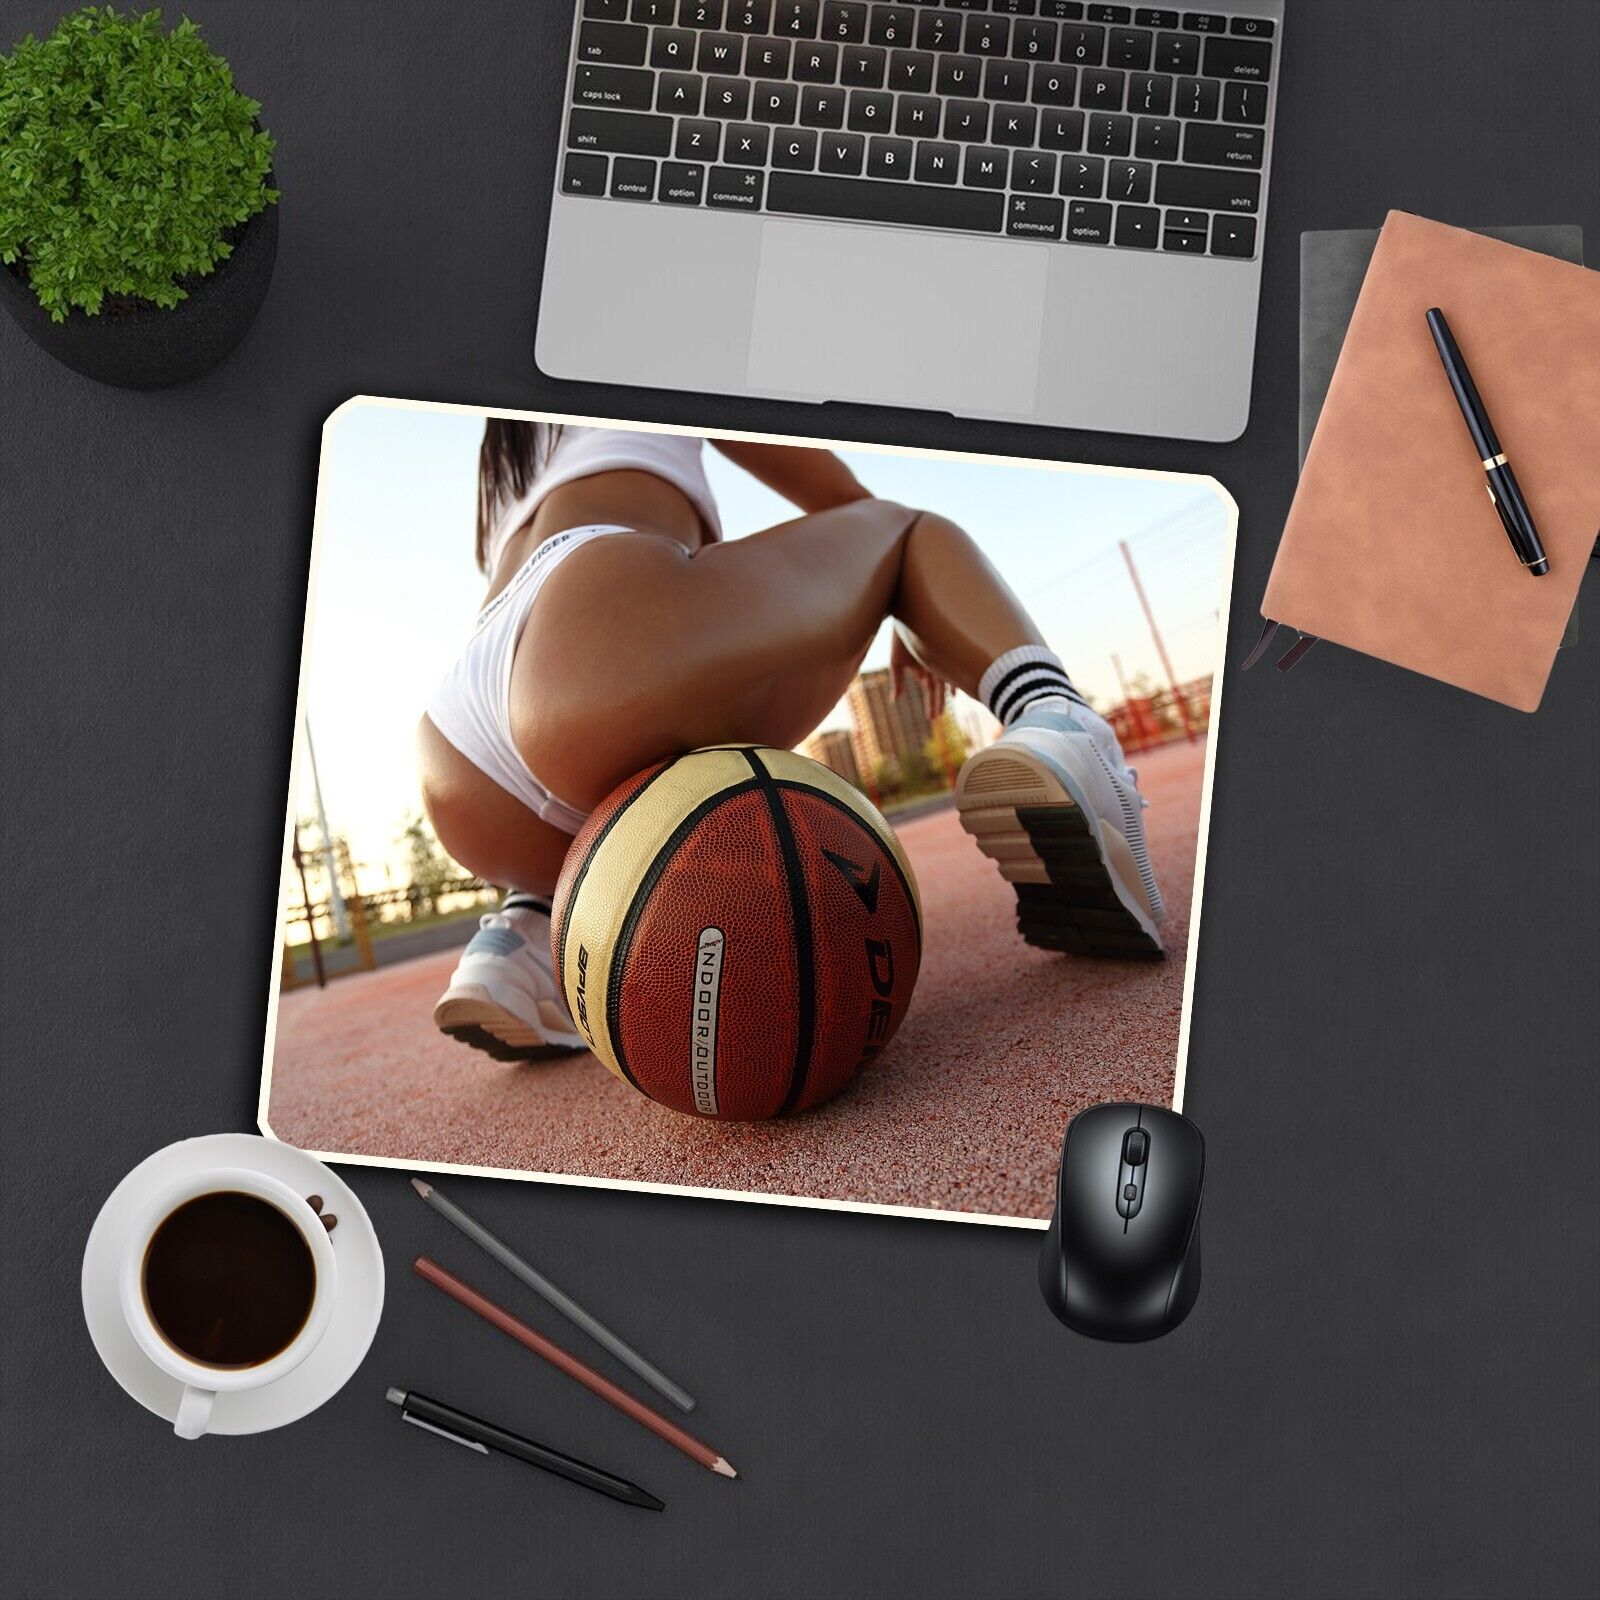 Sexy Girls Basketball Computer Mouse Pad Mat Keyboard Desk Non Slip 9.8x11.8in